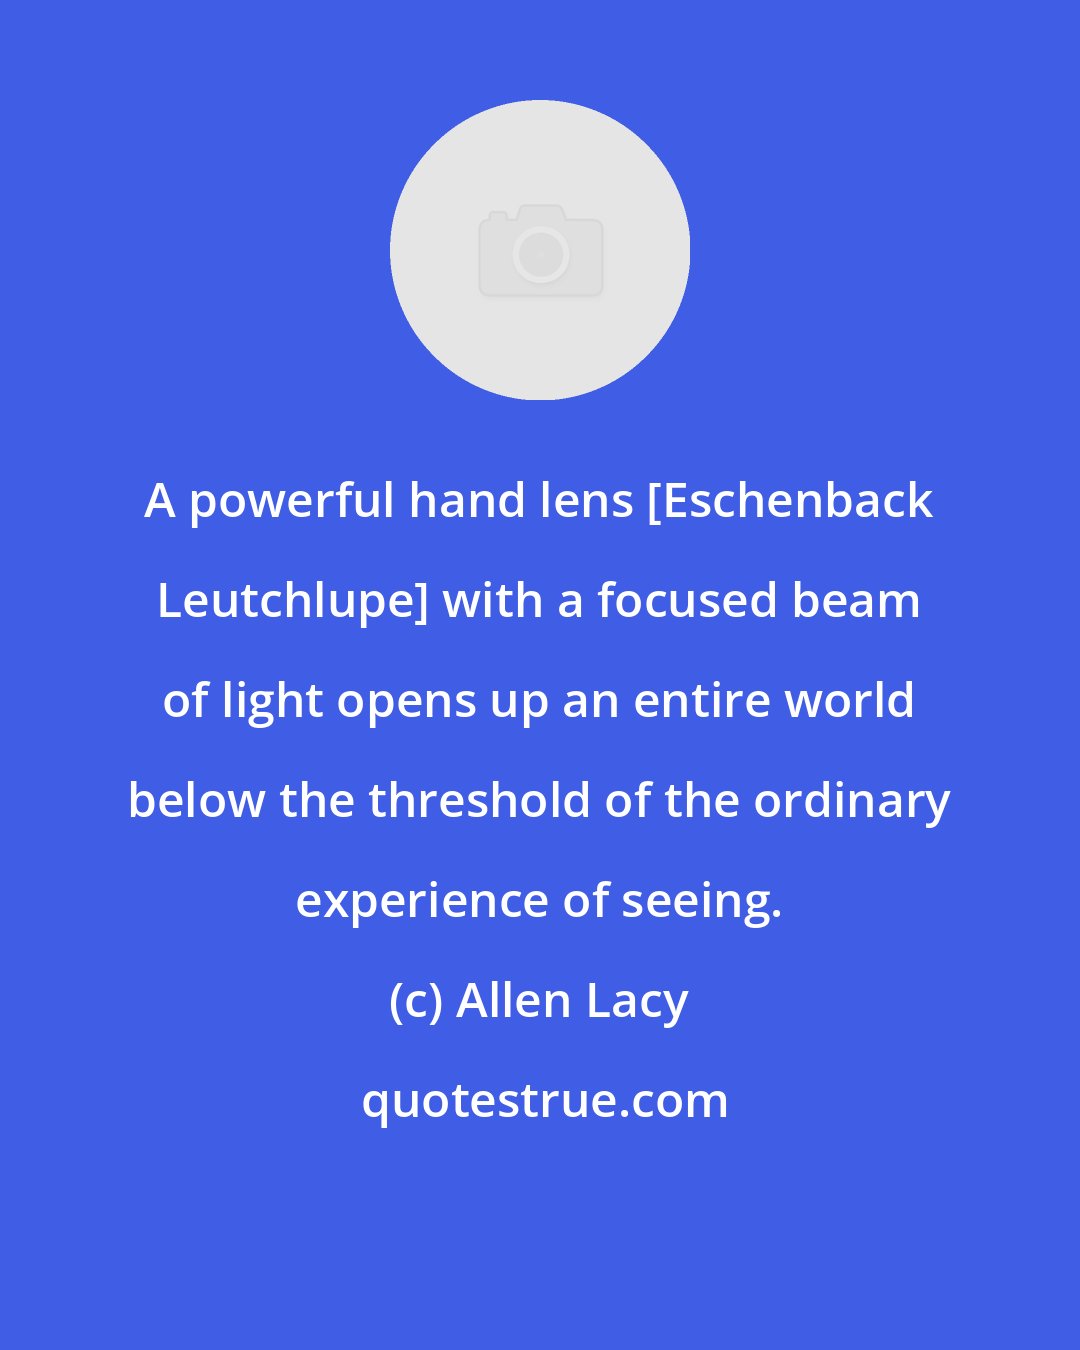 Allen Lacy: A powerful hand lens [Eschenback Leutchlupe] with a focused beam of light opens up an entire world below the threshold of the ordinary experience of seeing.